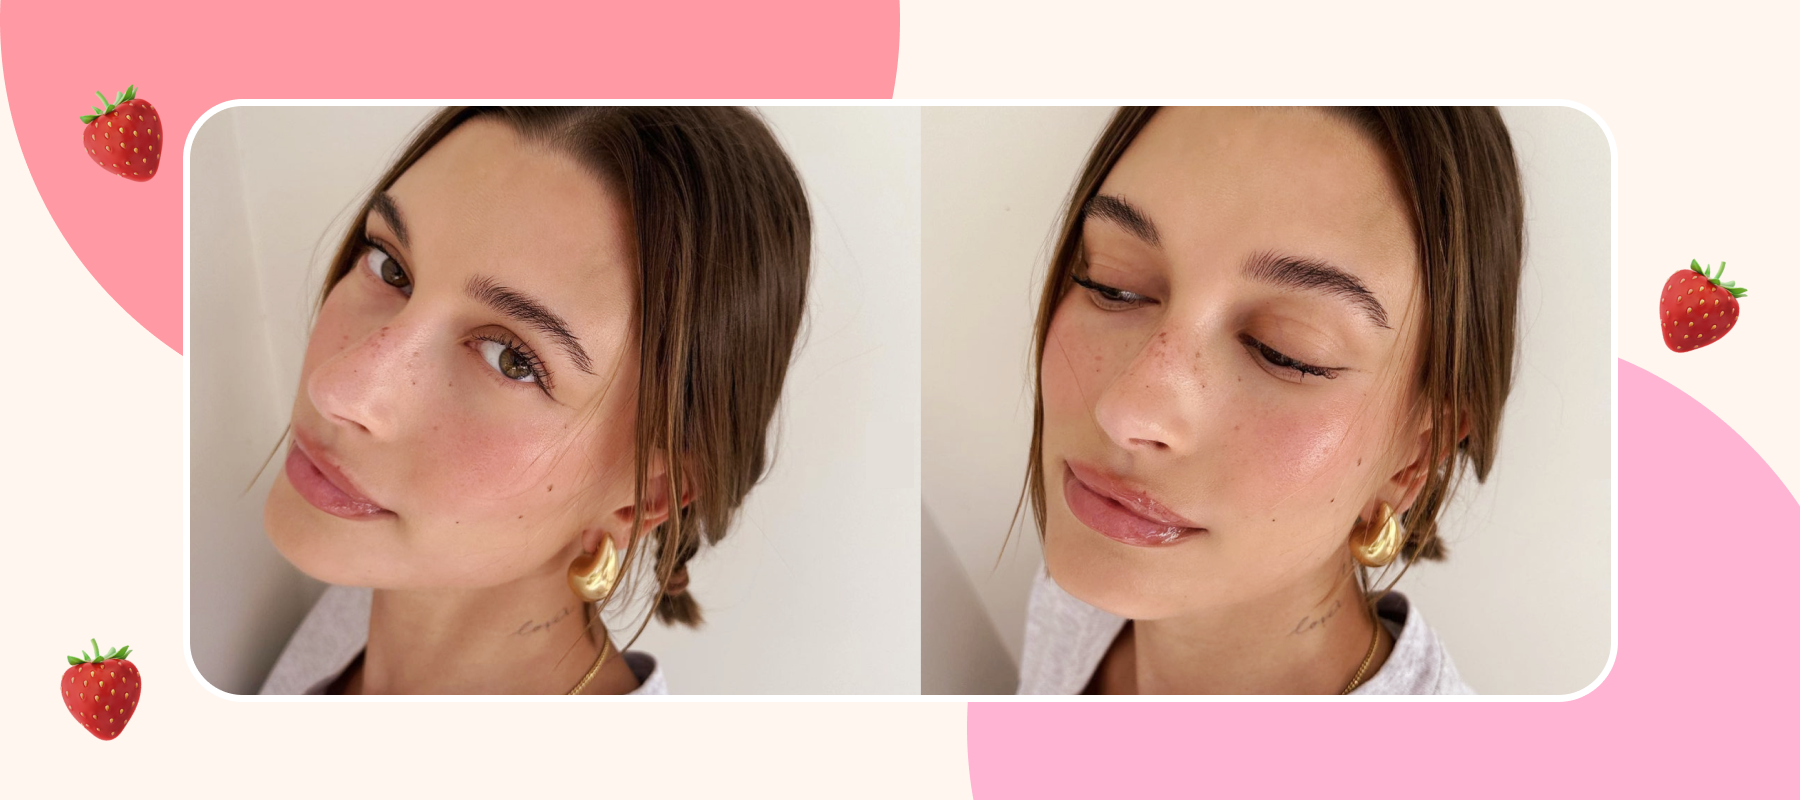 Here's How To Hack Hailey Beiber's Strawberry Girl Makeup on TikTok –  Fresh Beauty Co. USA